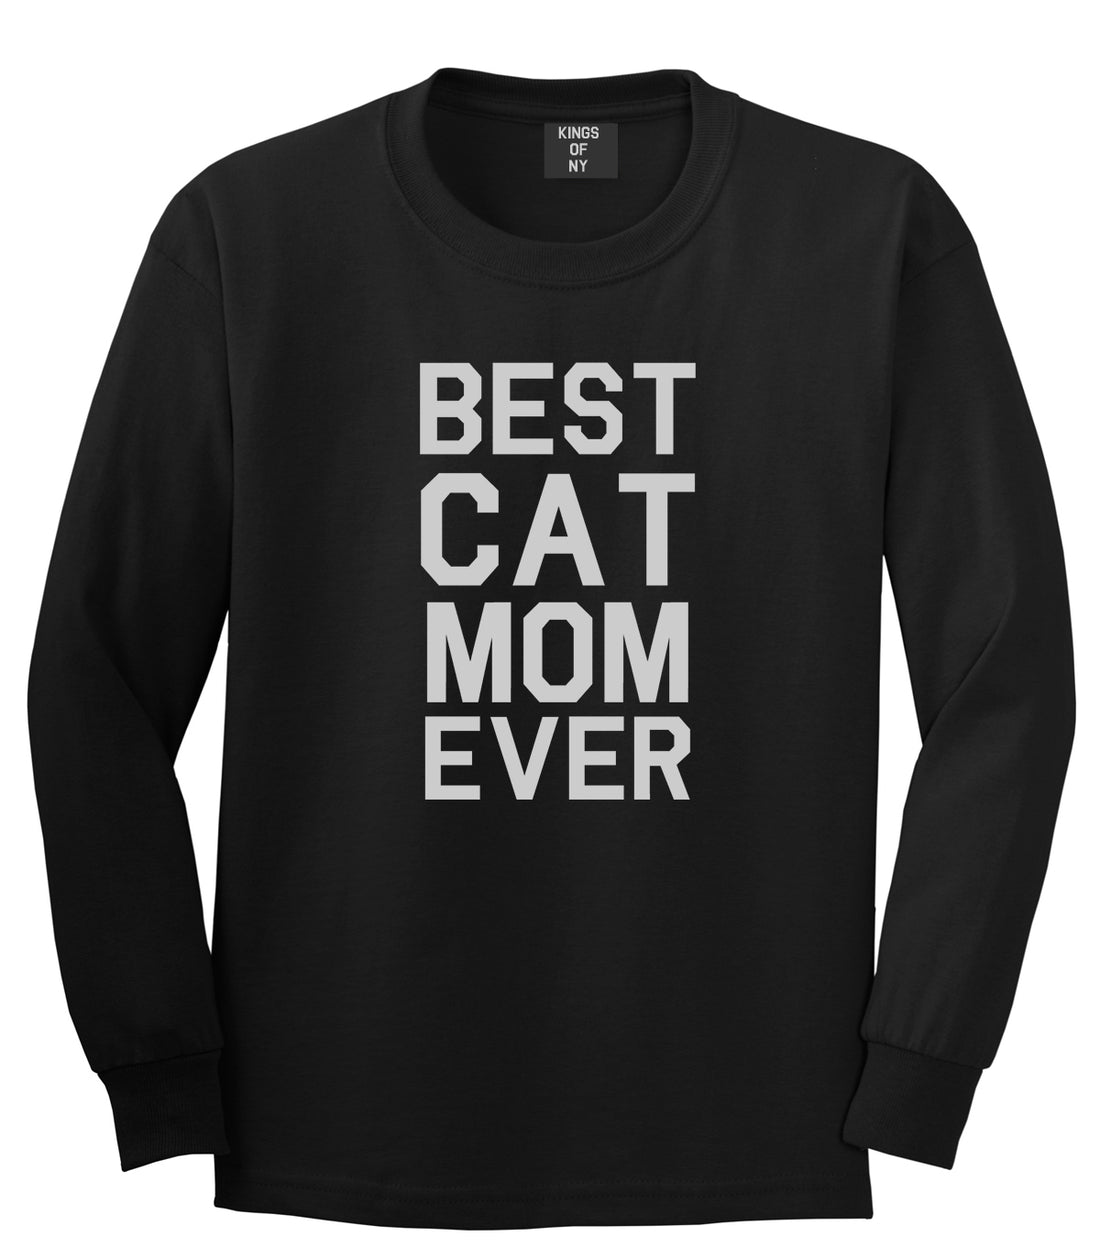 Best Cat Mom Ever Mens Black Long Sleeve T-Shirt by Kings Of NY